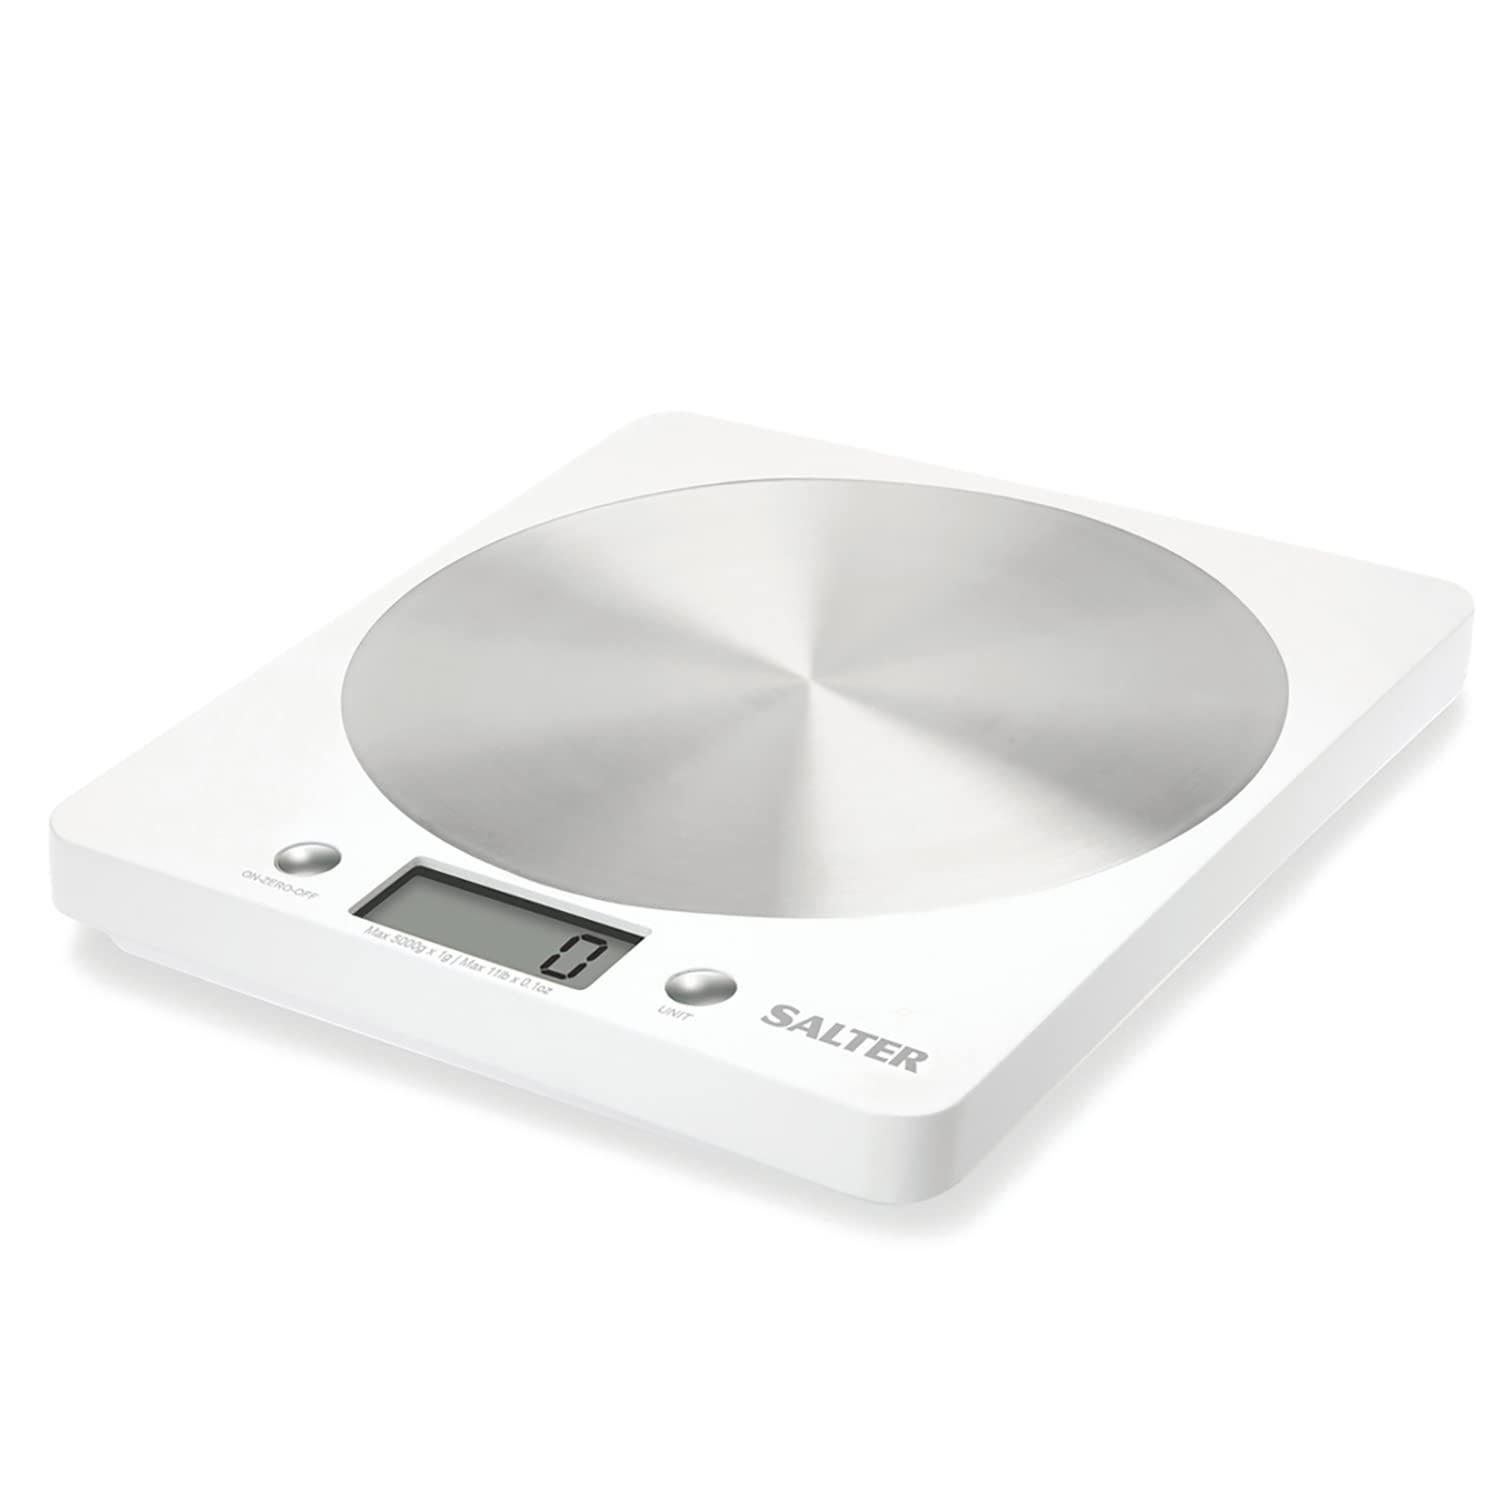 Salter Disc Electronic Kitchen Scale: 1036 WHSSDR